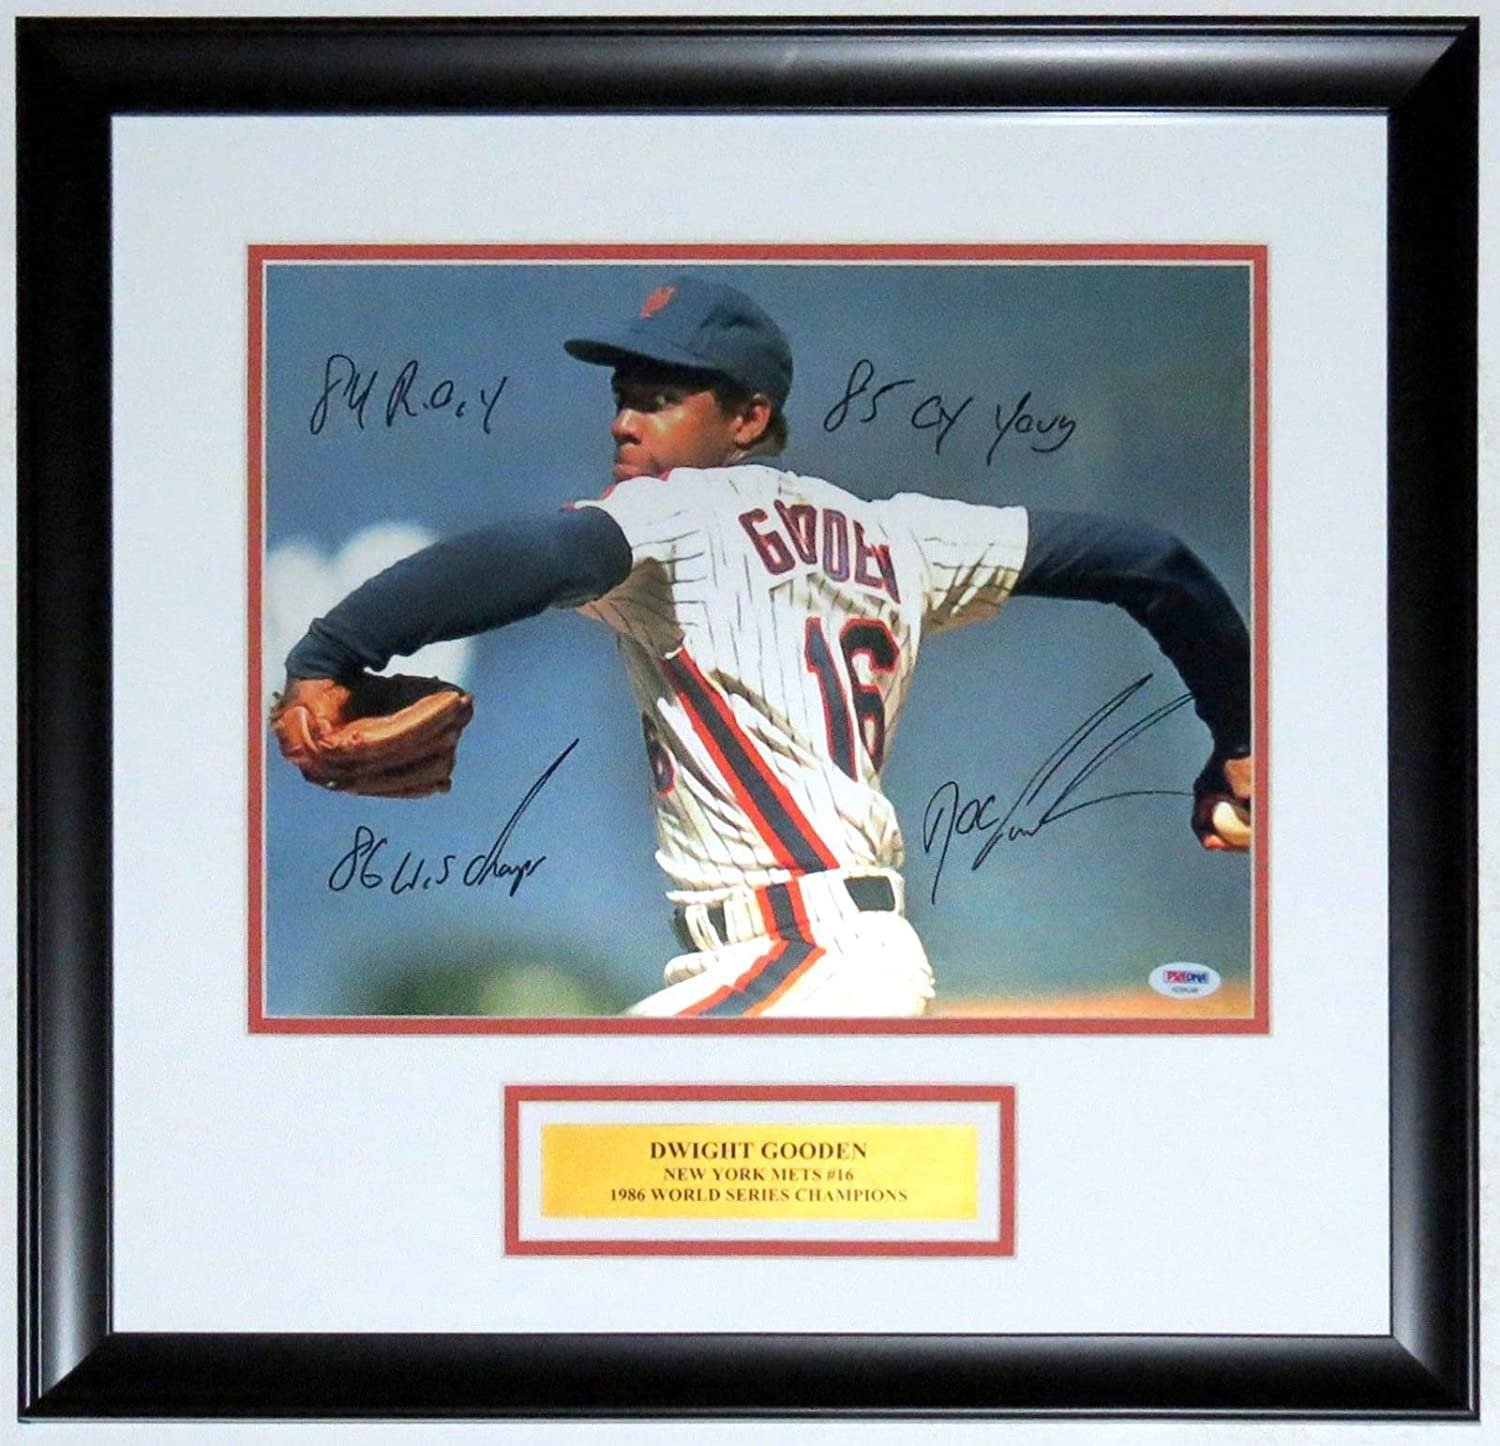 Bleachers Sports Music & Framing — Dwight Gooden Signed New York Mets 11x14  Photo and 3 Inscriptions - PSA DNA COA Authenticated Framed